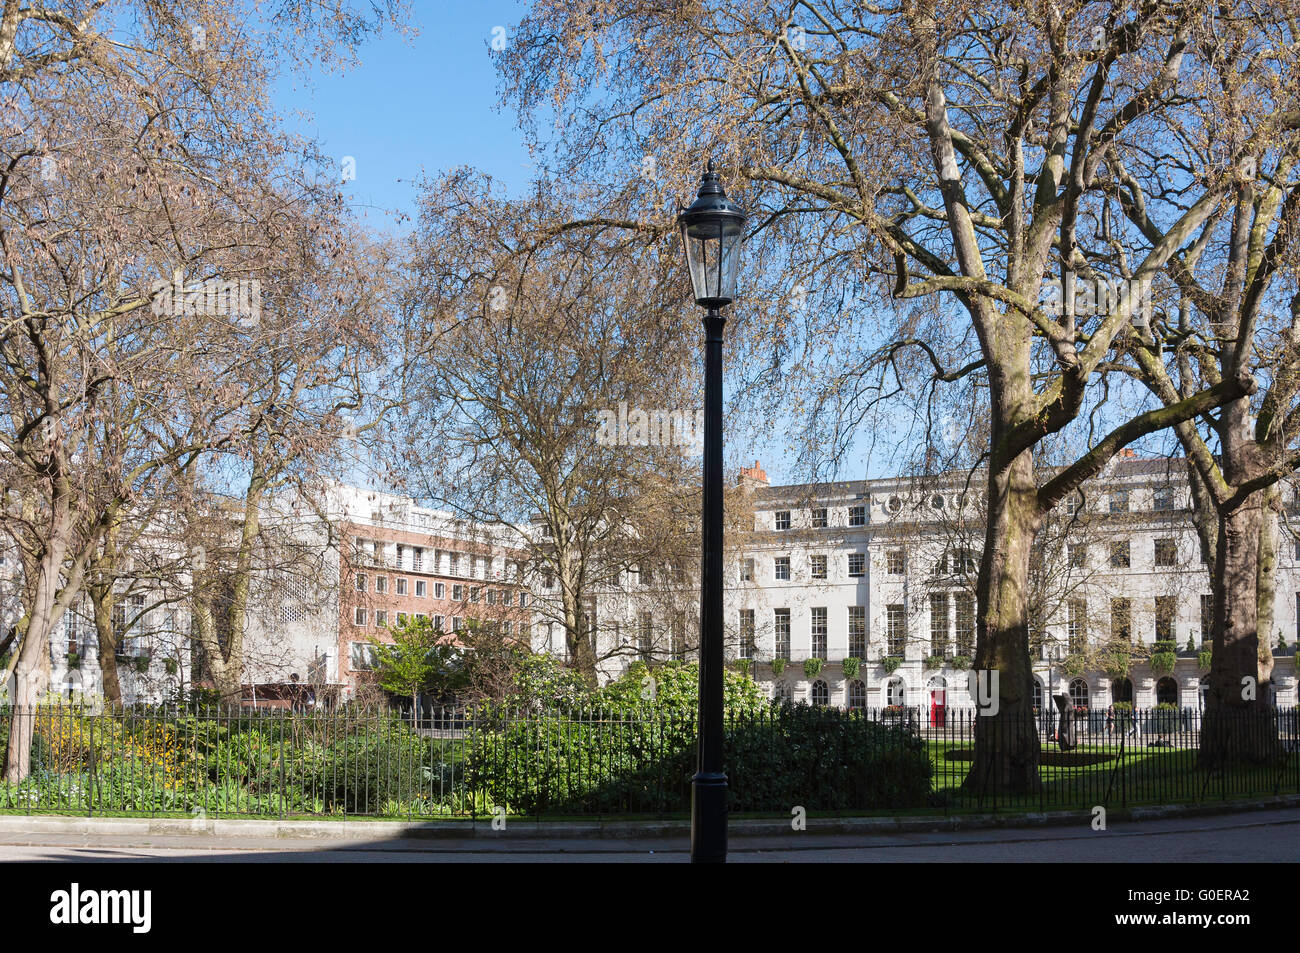 Fitzroy Square, Fitzrovia, London Borough of Camden, Greater London, Angleterre, Royaume-Uni Banque D'Images